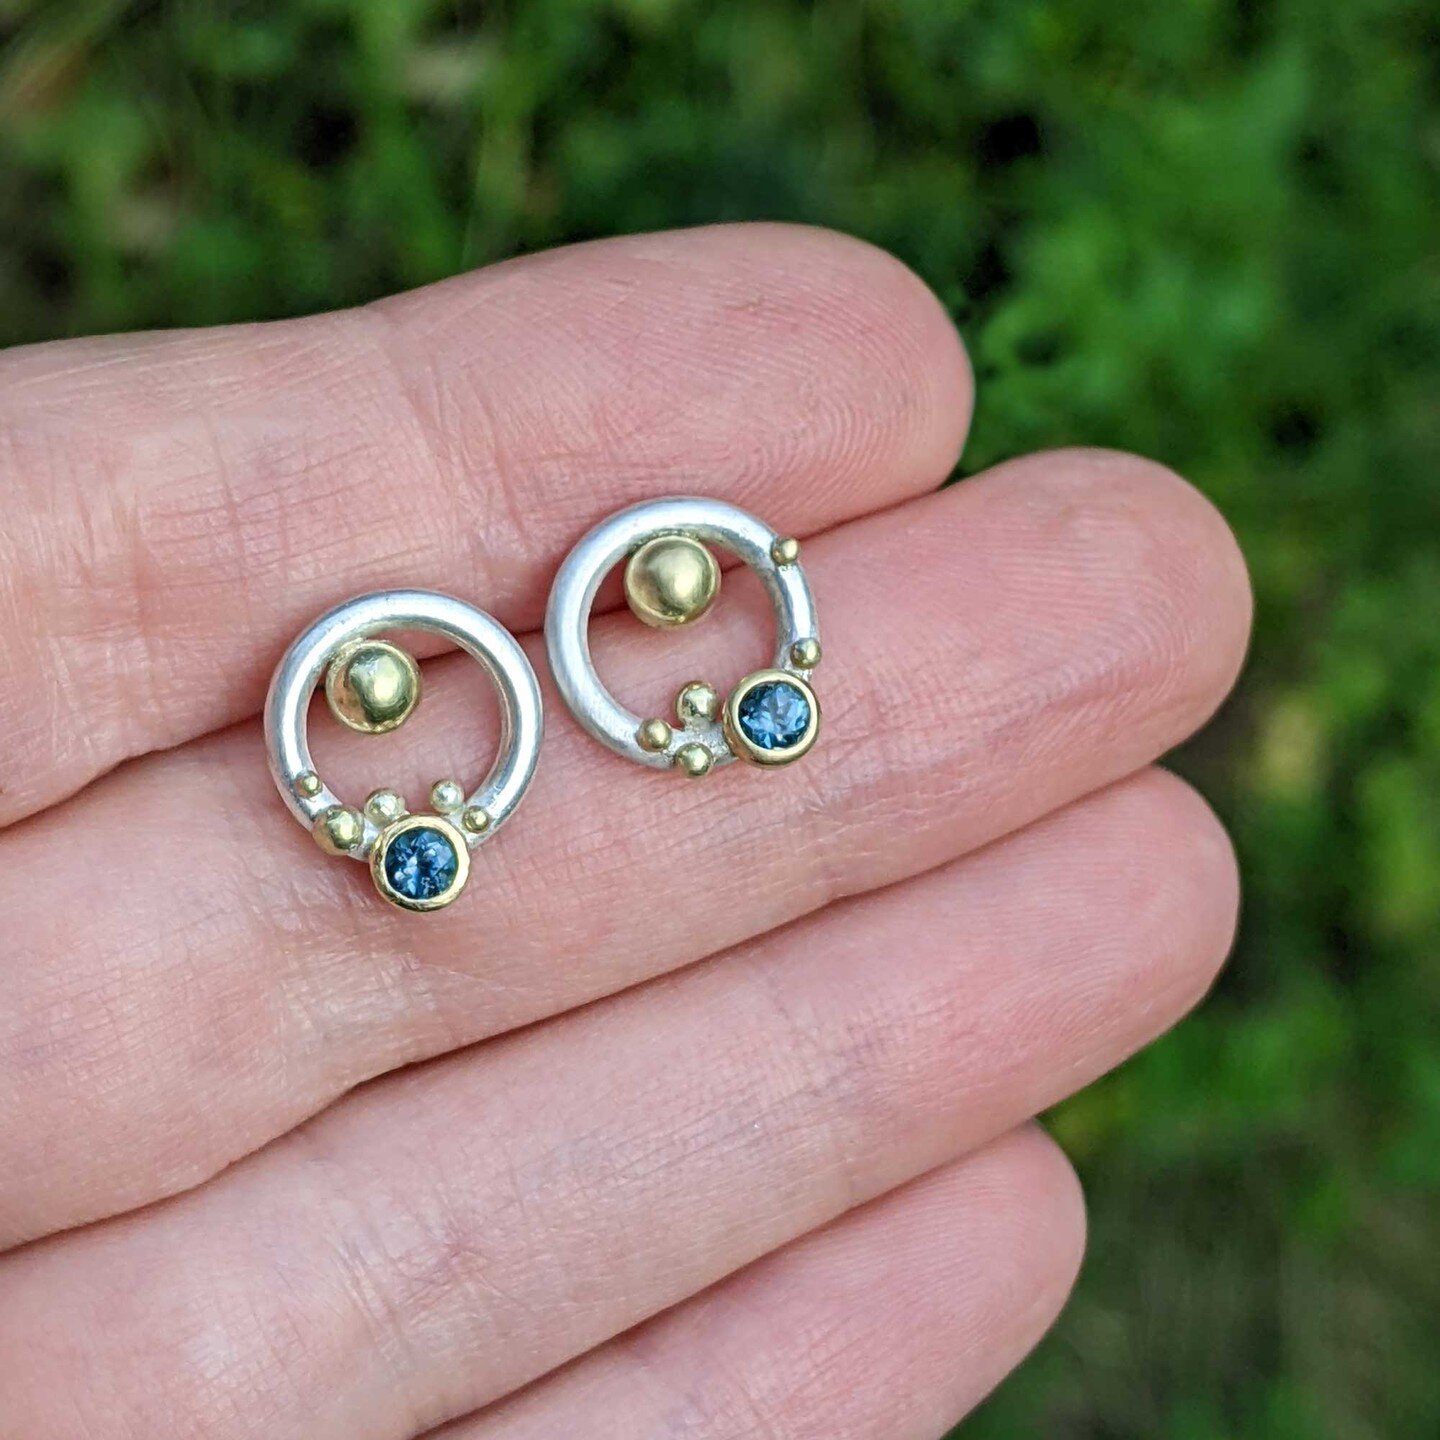 ✨ Earstuds with lovely Teal Blue Topaz &amp; Gold Granulation.

💎 Custom made a few weeks ago. Birthday gift from mother to daughter.

😊 I loved making these, happy to make more if anyone wants them!

#CustomMadeJewellery
#GemstoneJewellery
#Handma